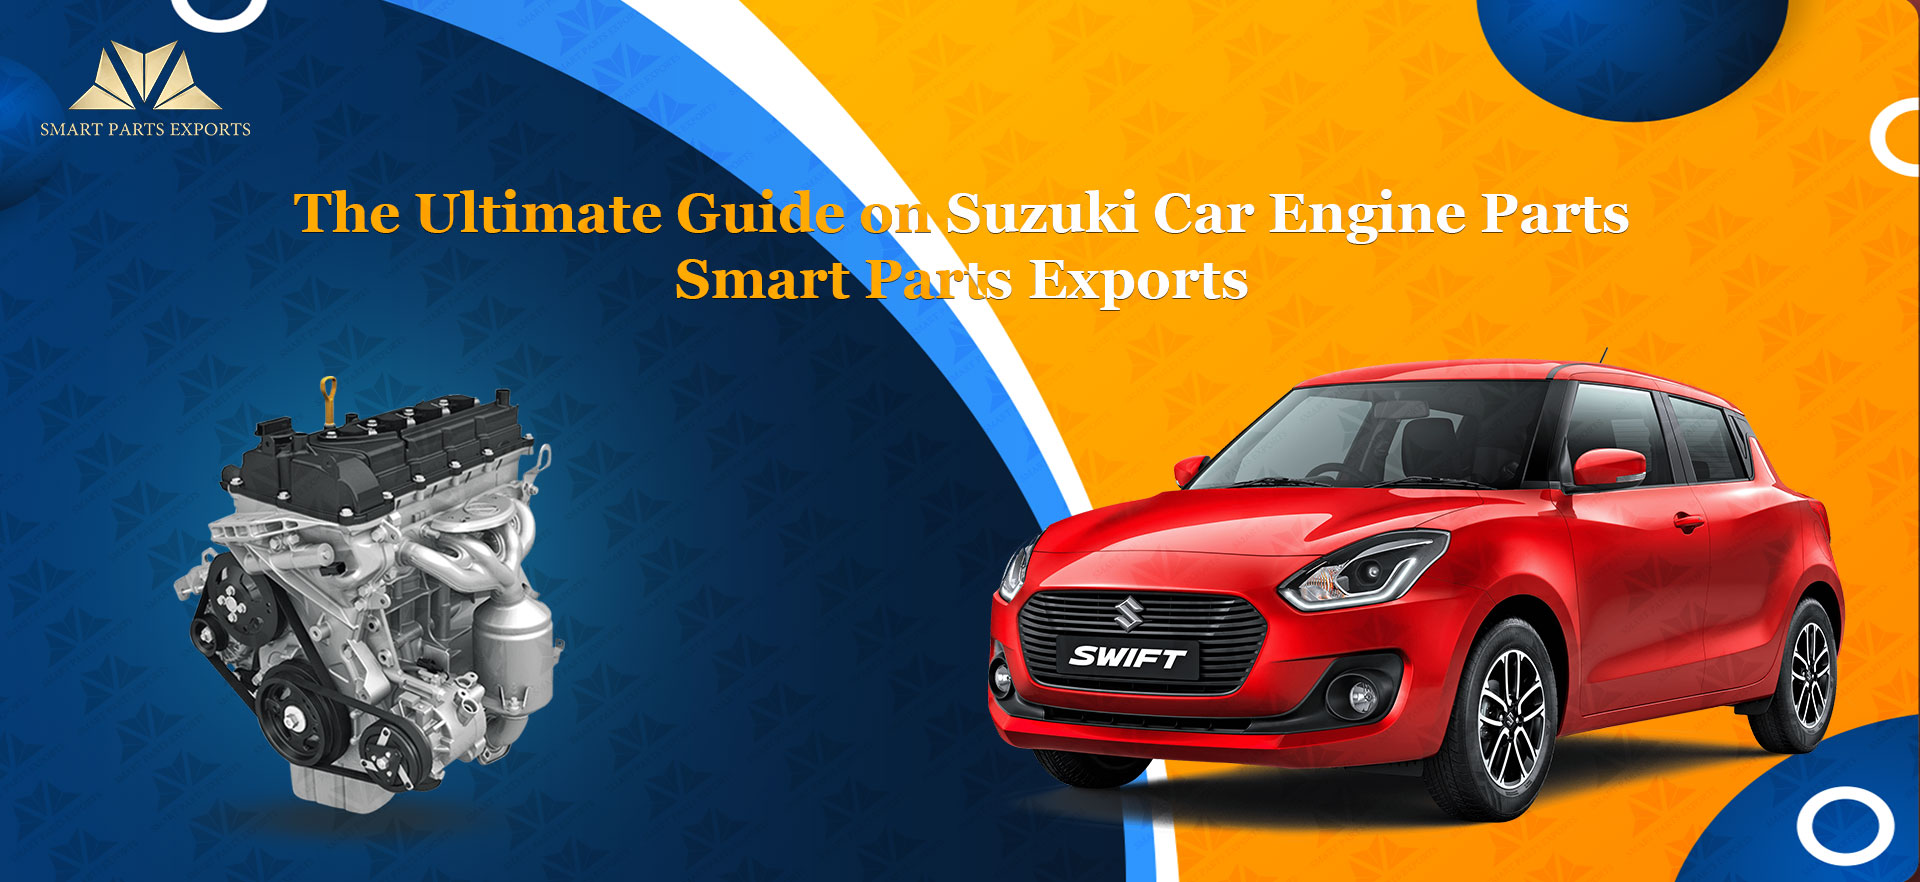 The Ultimate Guide on Suzuki Car Engine Parts | Smart Parts Exports